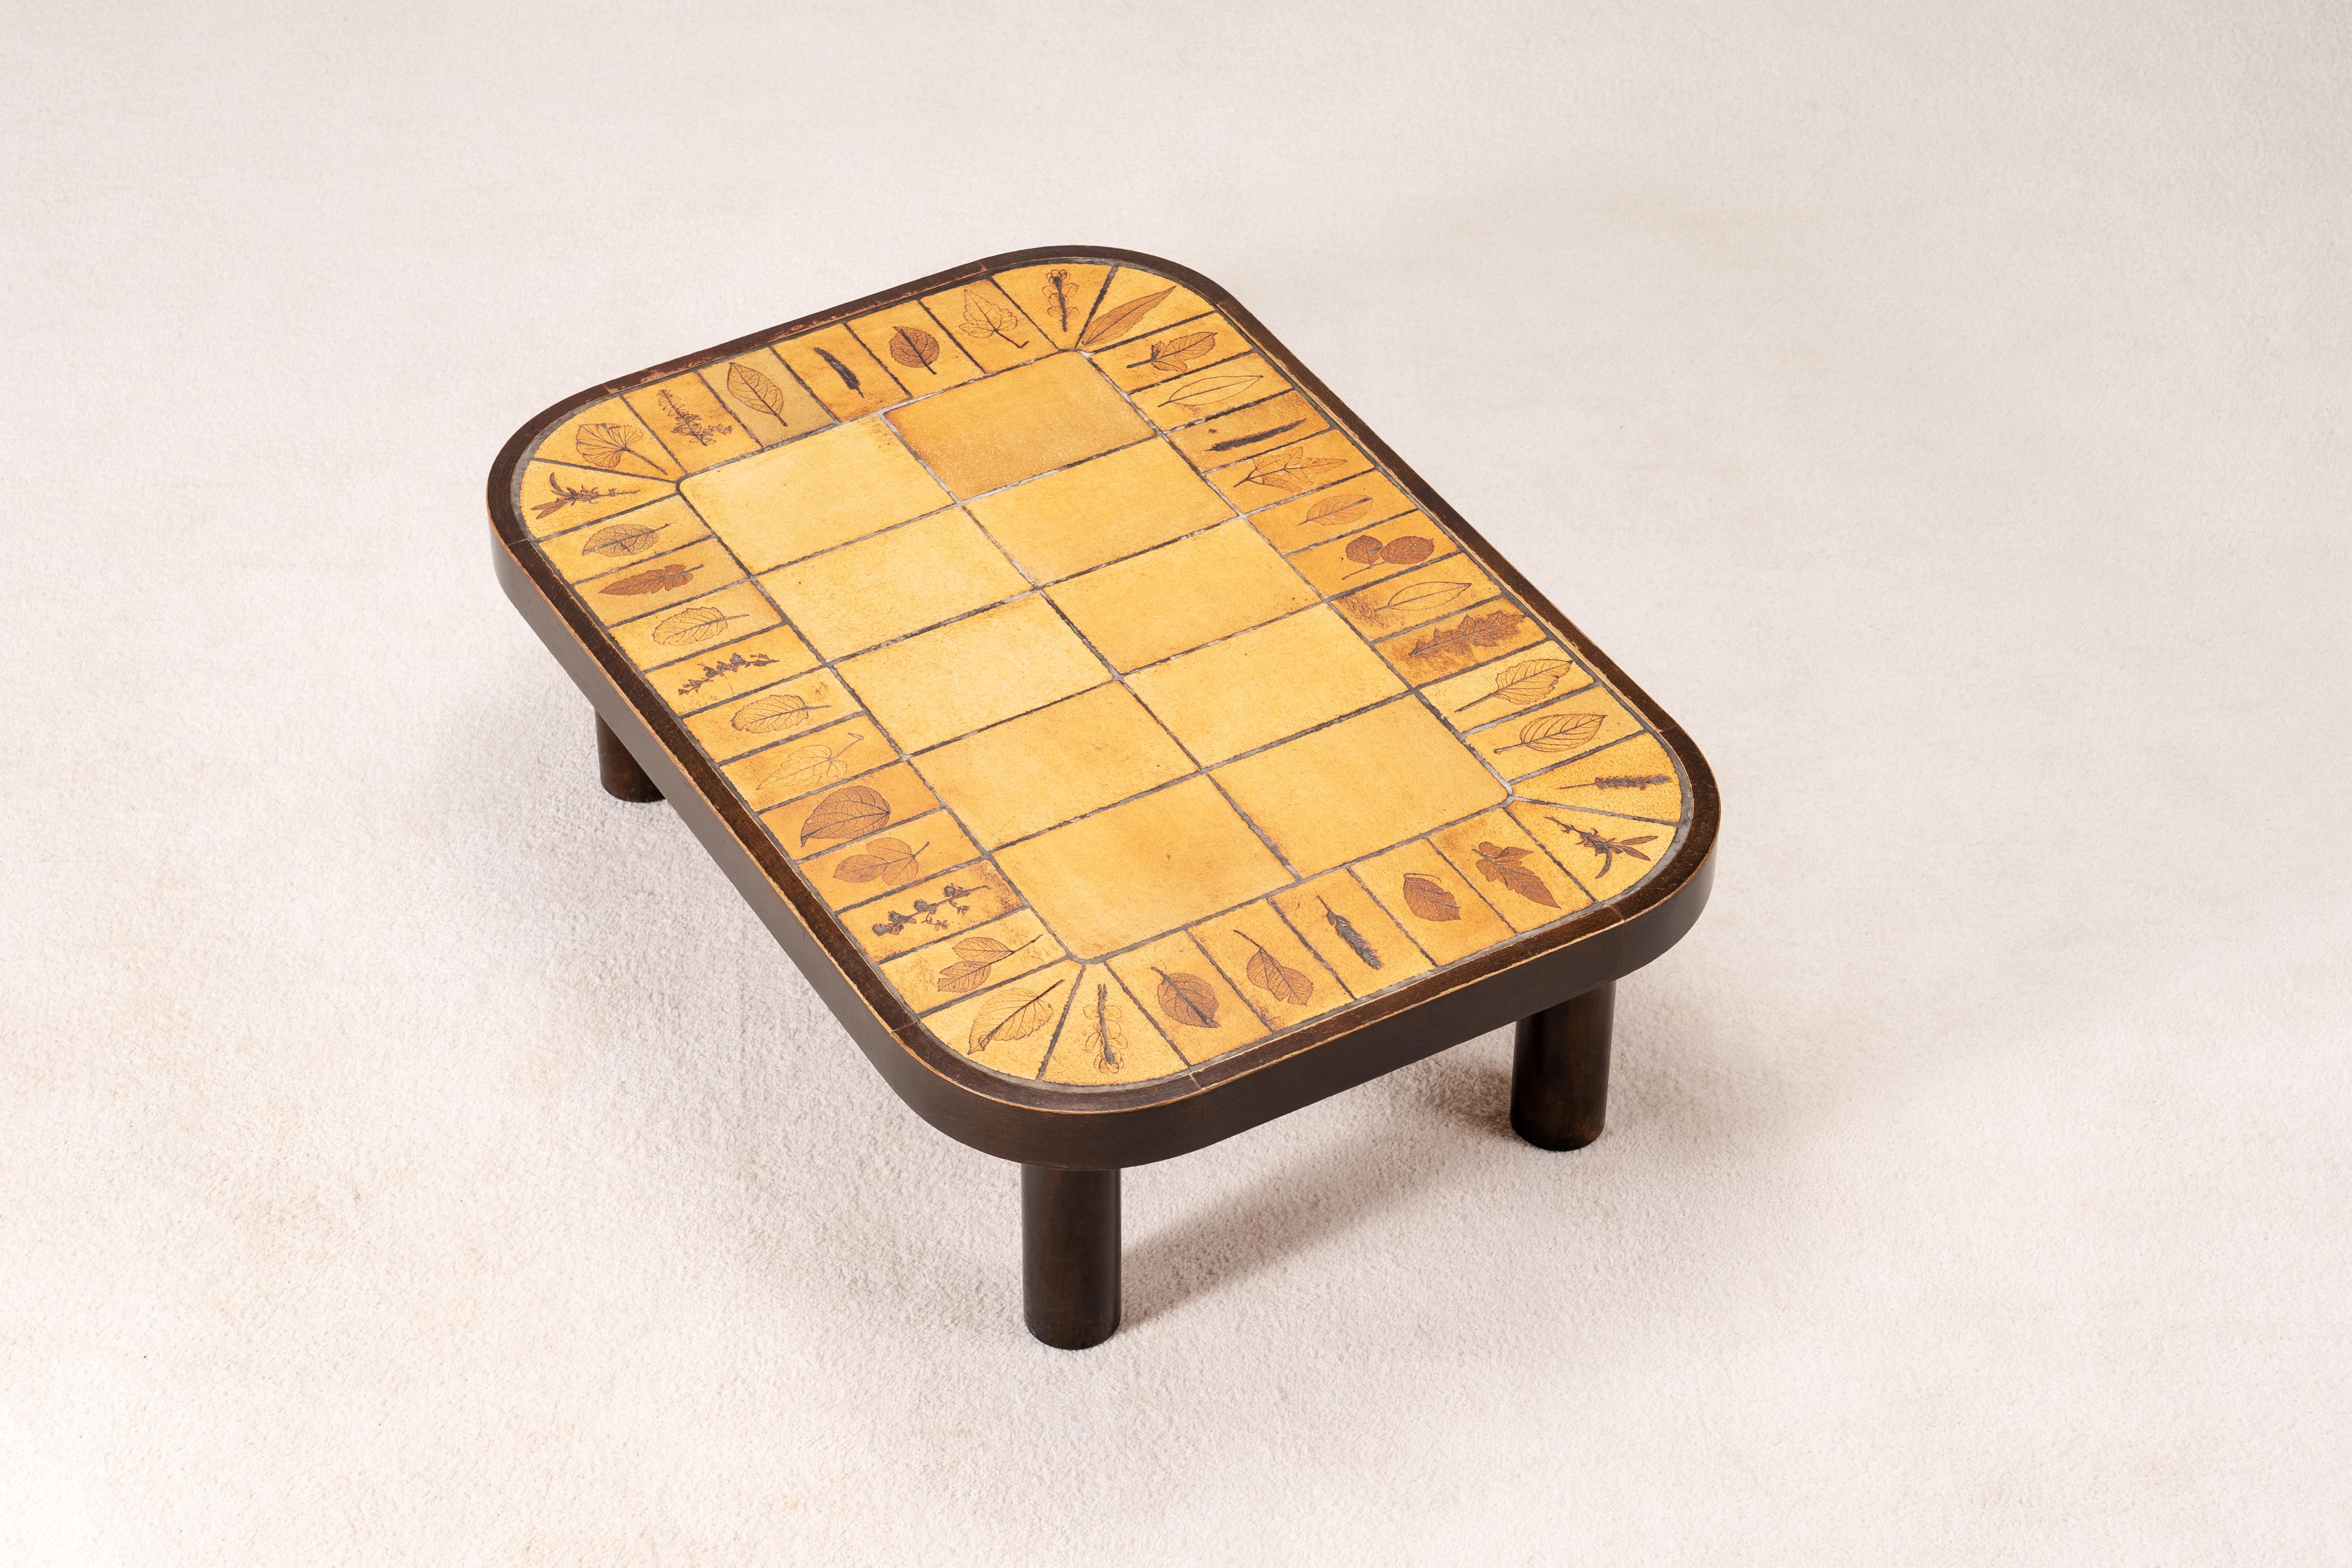 French Roger Capron, Ceramic Coffee Table, Vallauris, France, 1960s